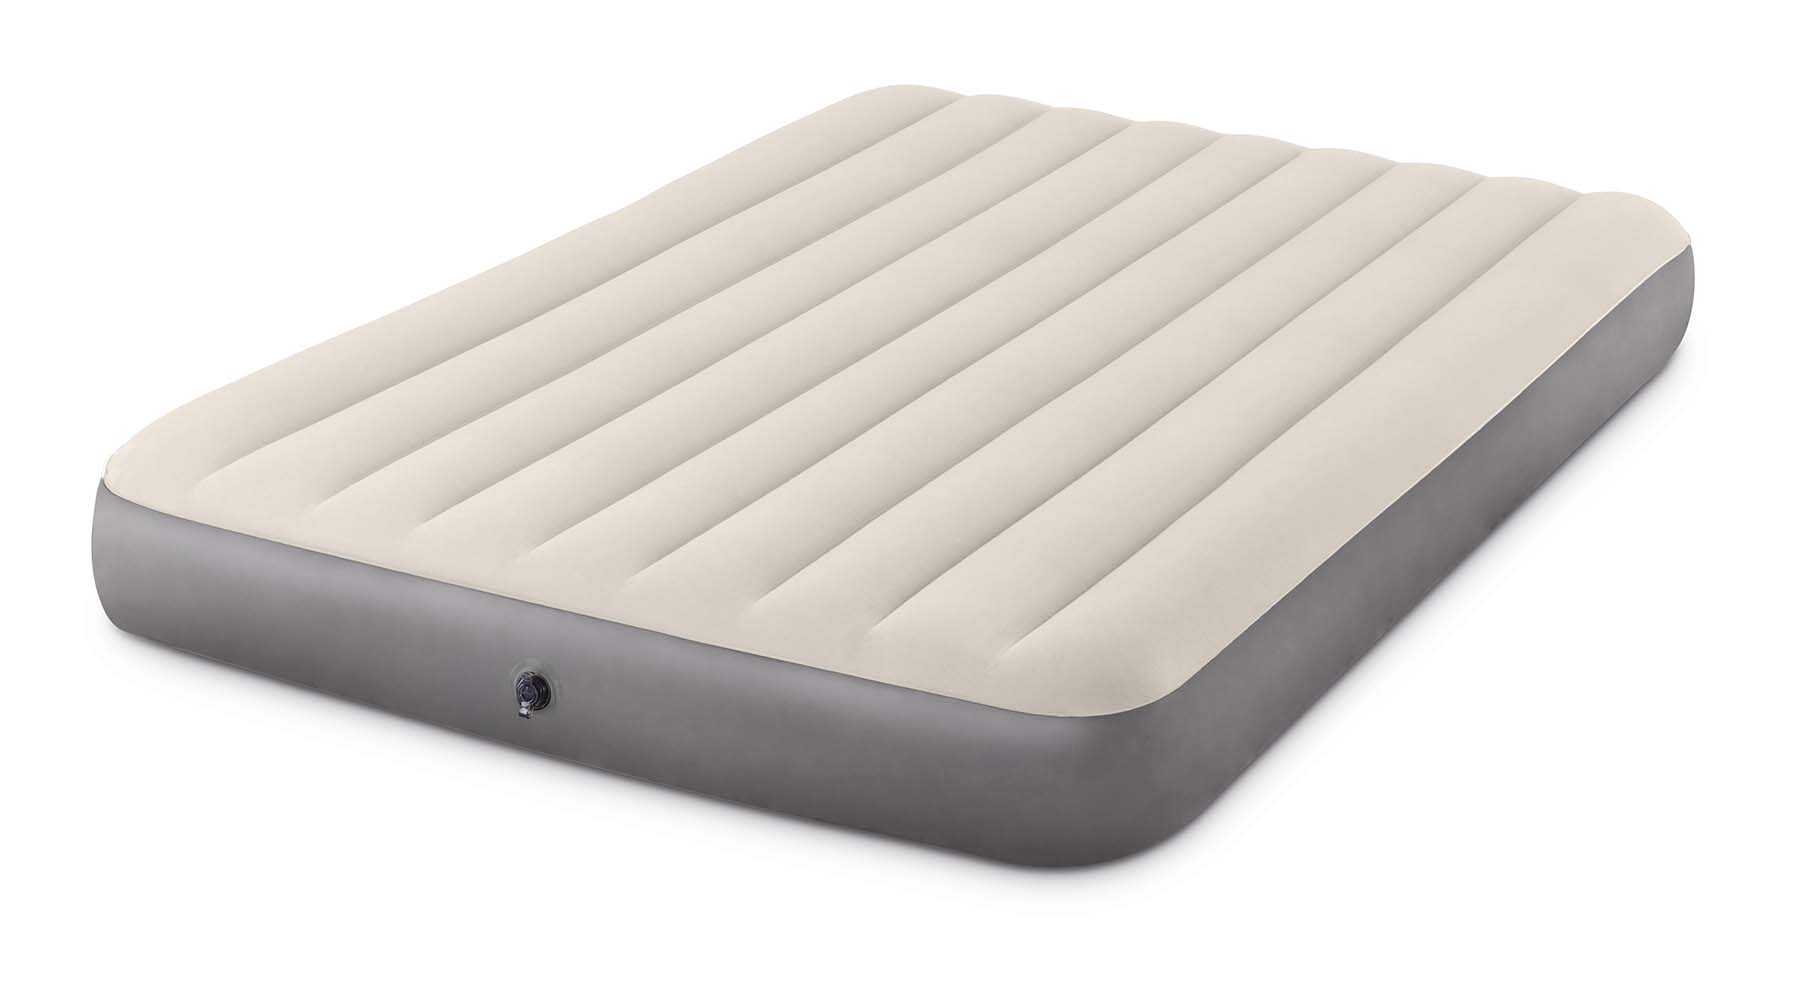 3264103 A high and strong inflatable mattress. Fitted with a soft top layer and a Dura-Beam® construction. Here, the vinyl partitions have been replaced by thousands of very strong polyester threads so that the partitions cannot break. This type of connection ensures a low weight, a stable surface and a high level of comfort. The inflatable mattress is lightweight which makes it ideal for the home but also suitable for campers. The Fiber-Tech technology ensures maximum quality and comfort. Includes a 2-in-1 valve for extra rapid inflation and deflation